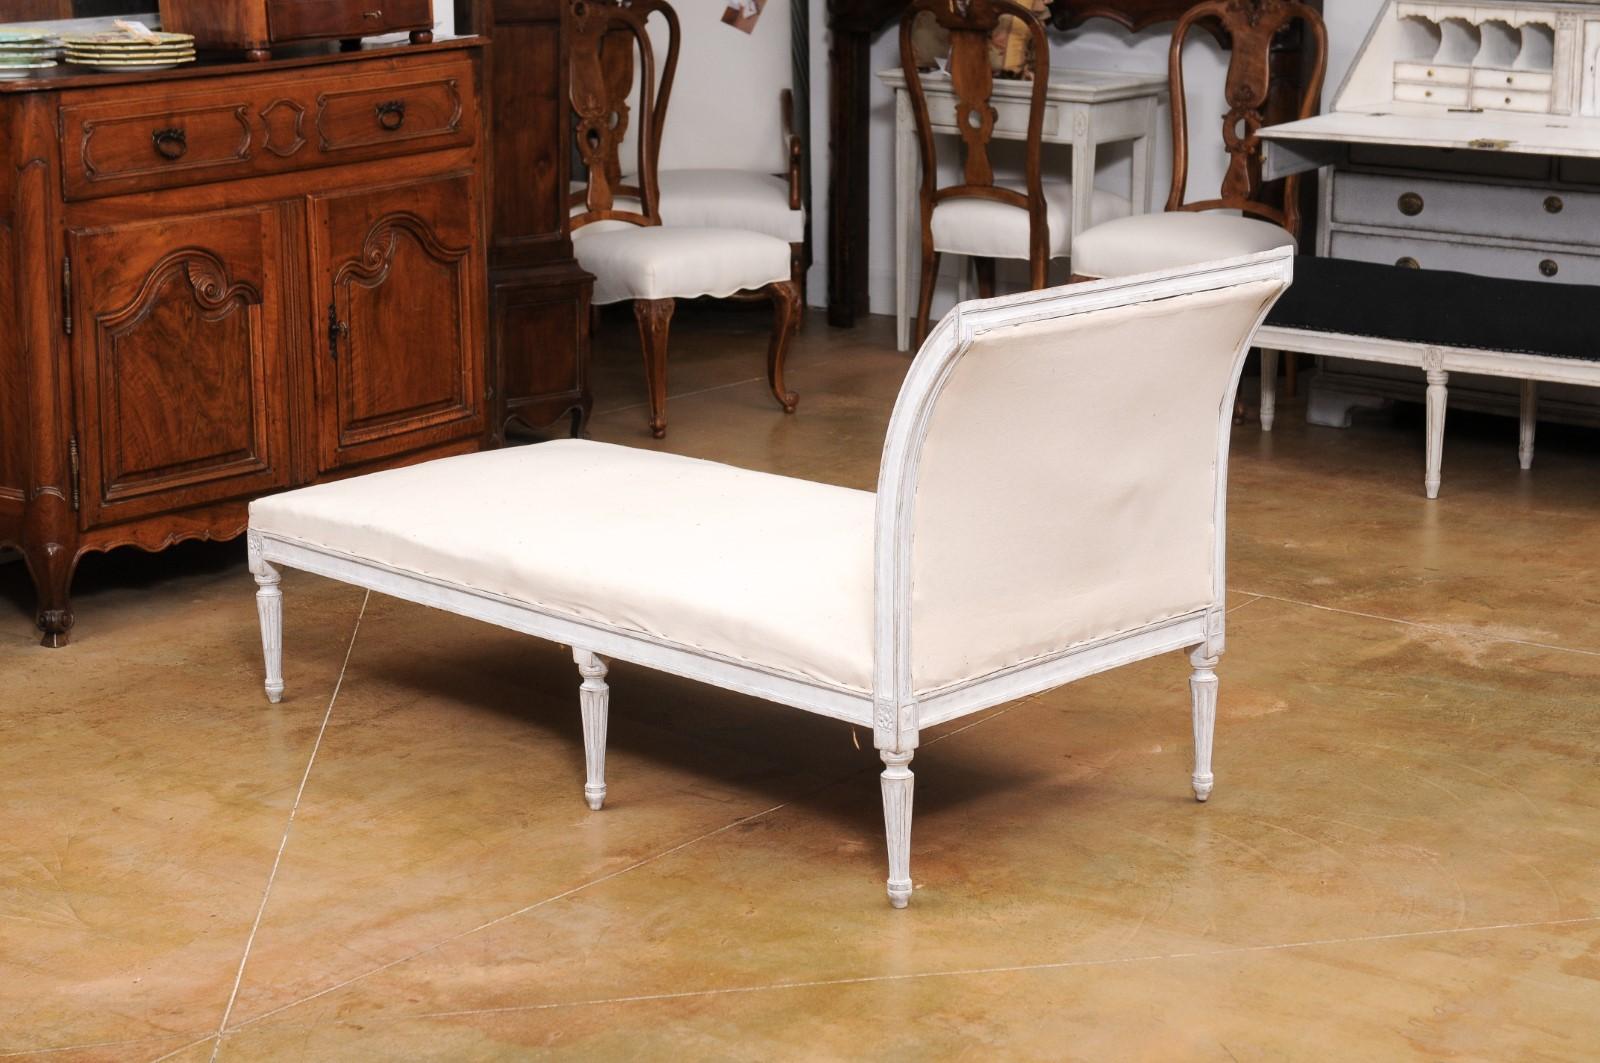 European Neoclassical 1830s Painted Daybed with Carved Rosettes and Fluted Legs For Sale 8